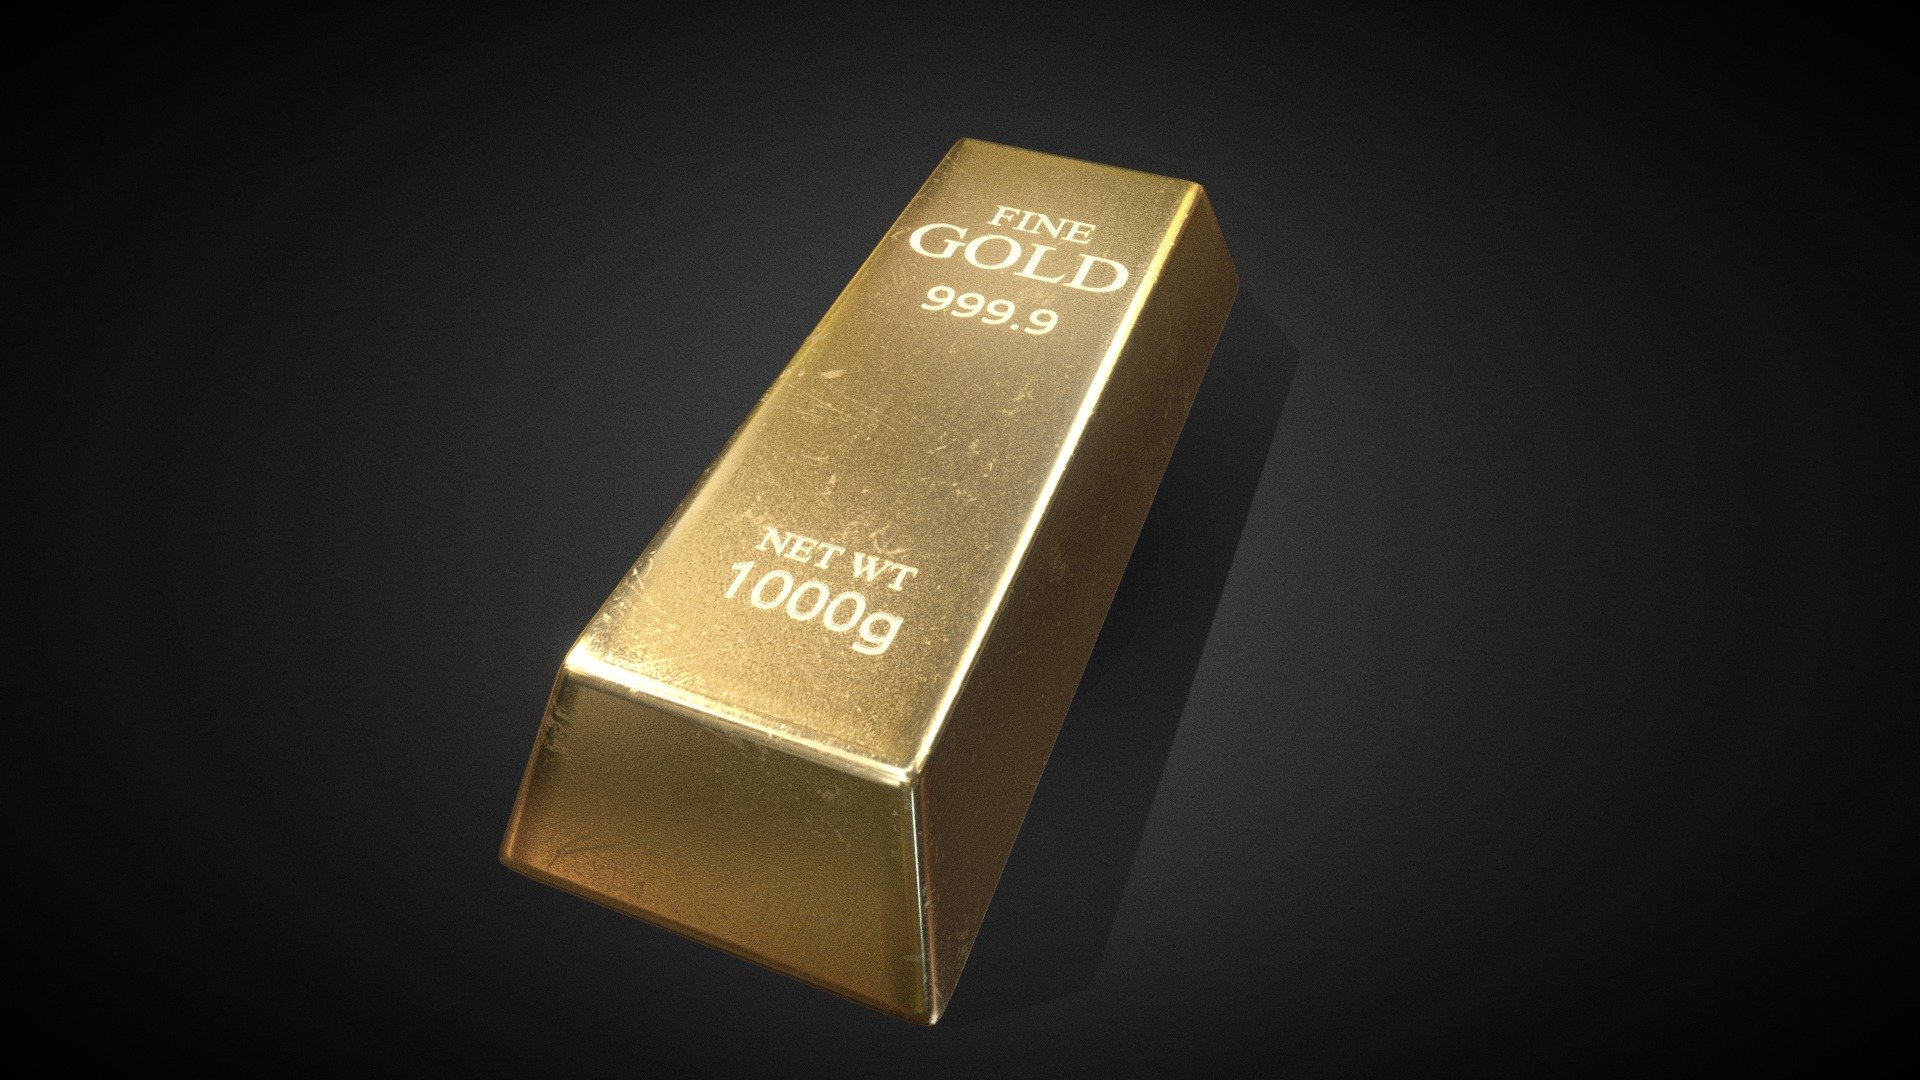 Gold bar made with Blender and Substance Painter 3d model